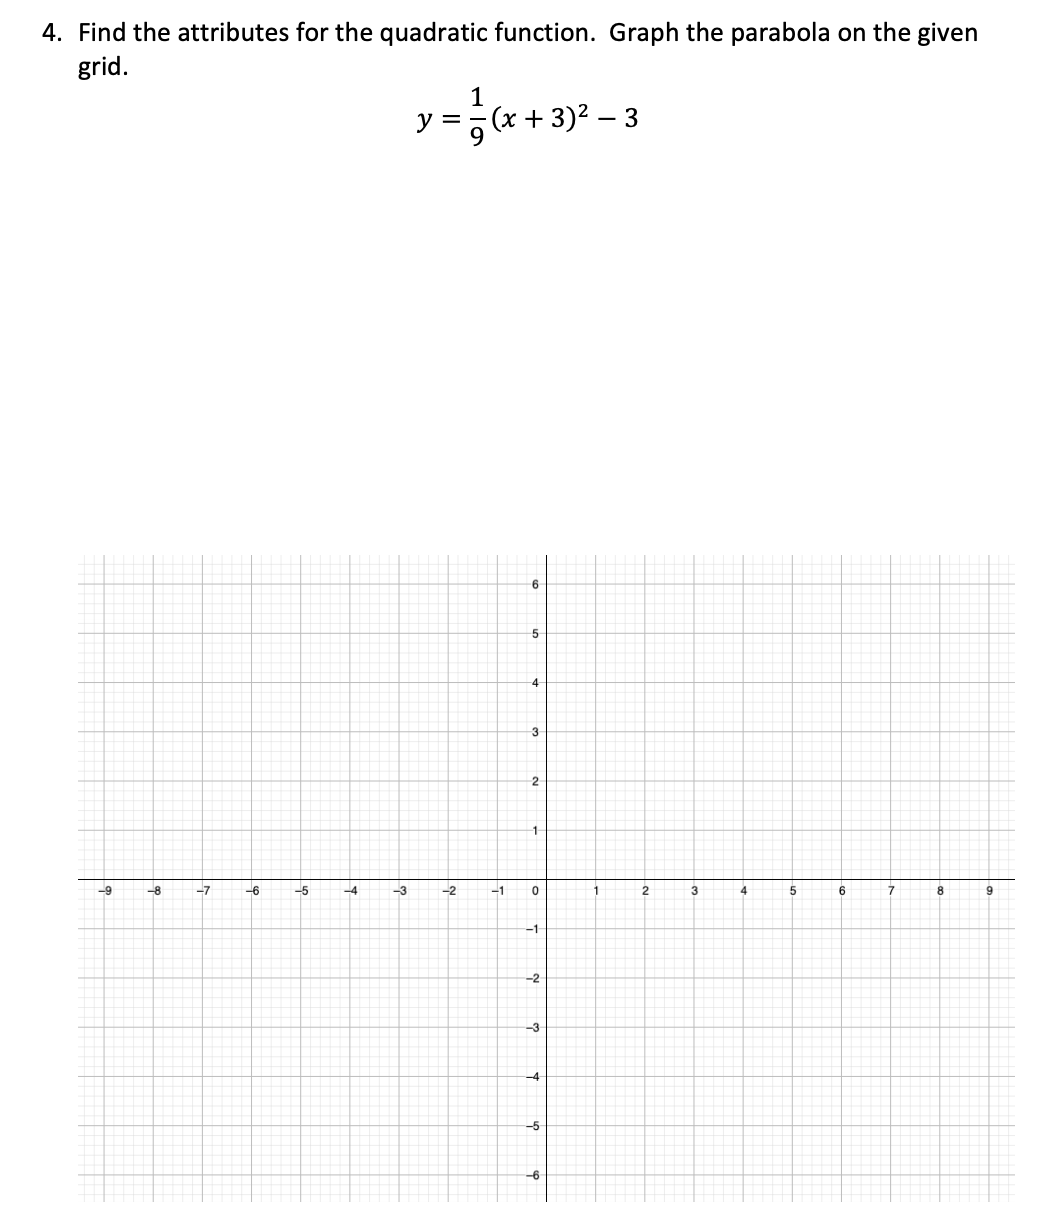 4. Find the attributes for the quadratic function. Graph the parabola on the given
grid.
1
y =, (x + 3)² – 3
6
-4
-1
-8
-7
-6
-5
-4
-3
-2
-1
1
2
5
6
7
8
9
-2
-3
-4
-5
-6
